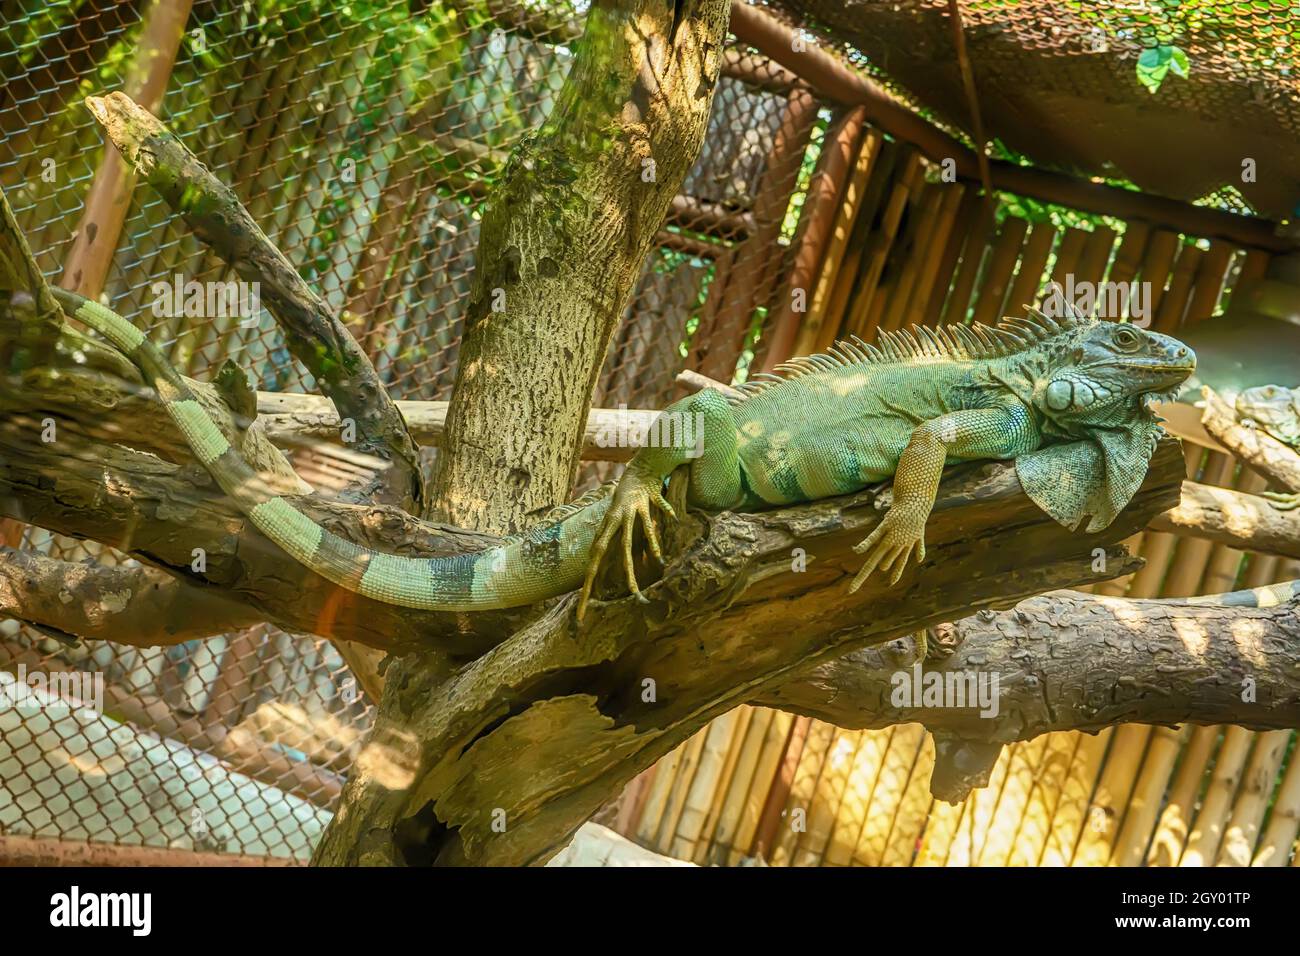 Green Iguana on the tree in a forest model. Stock Photo